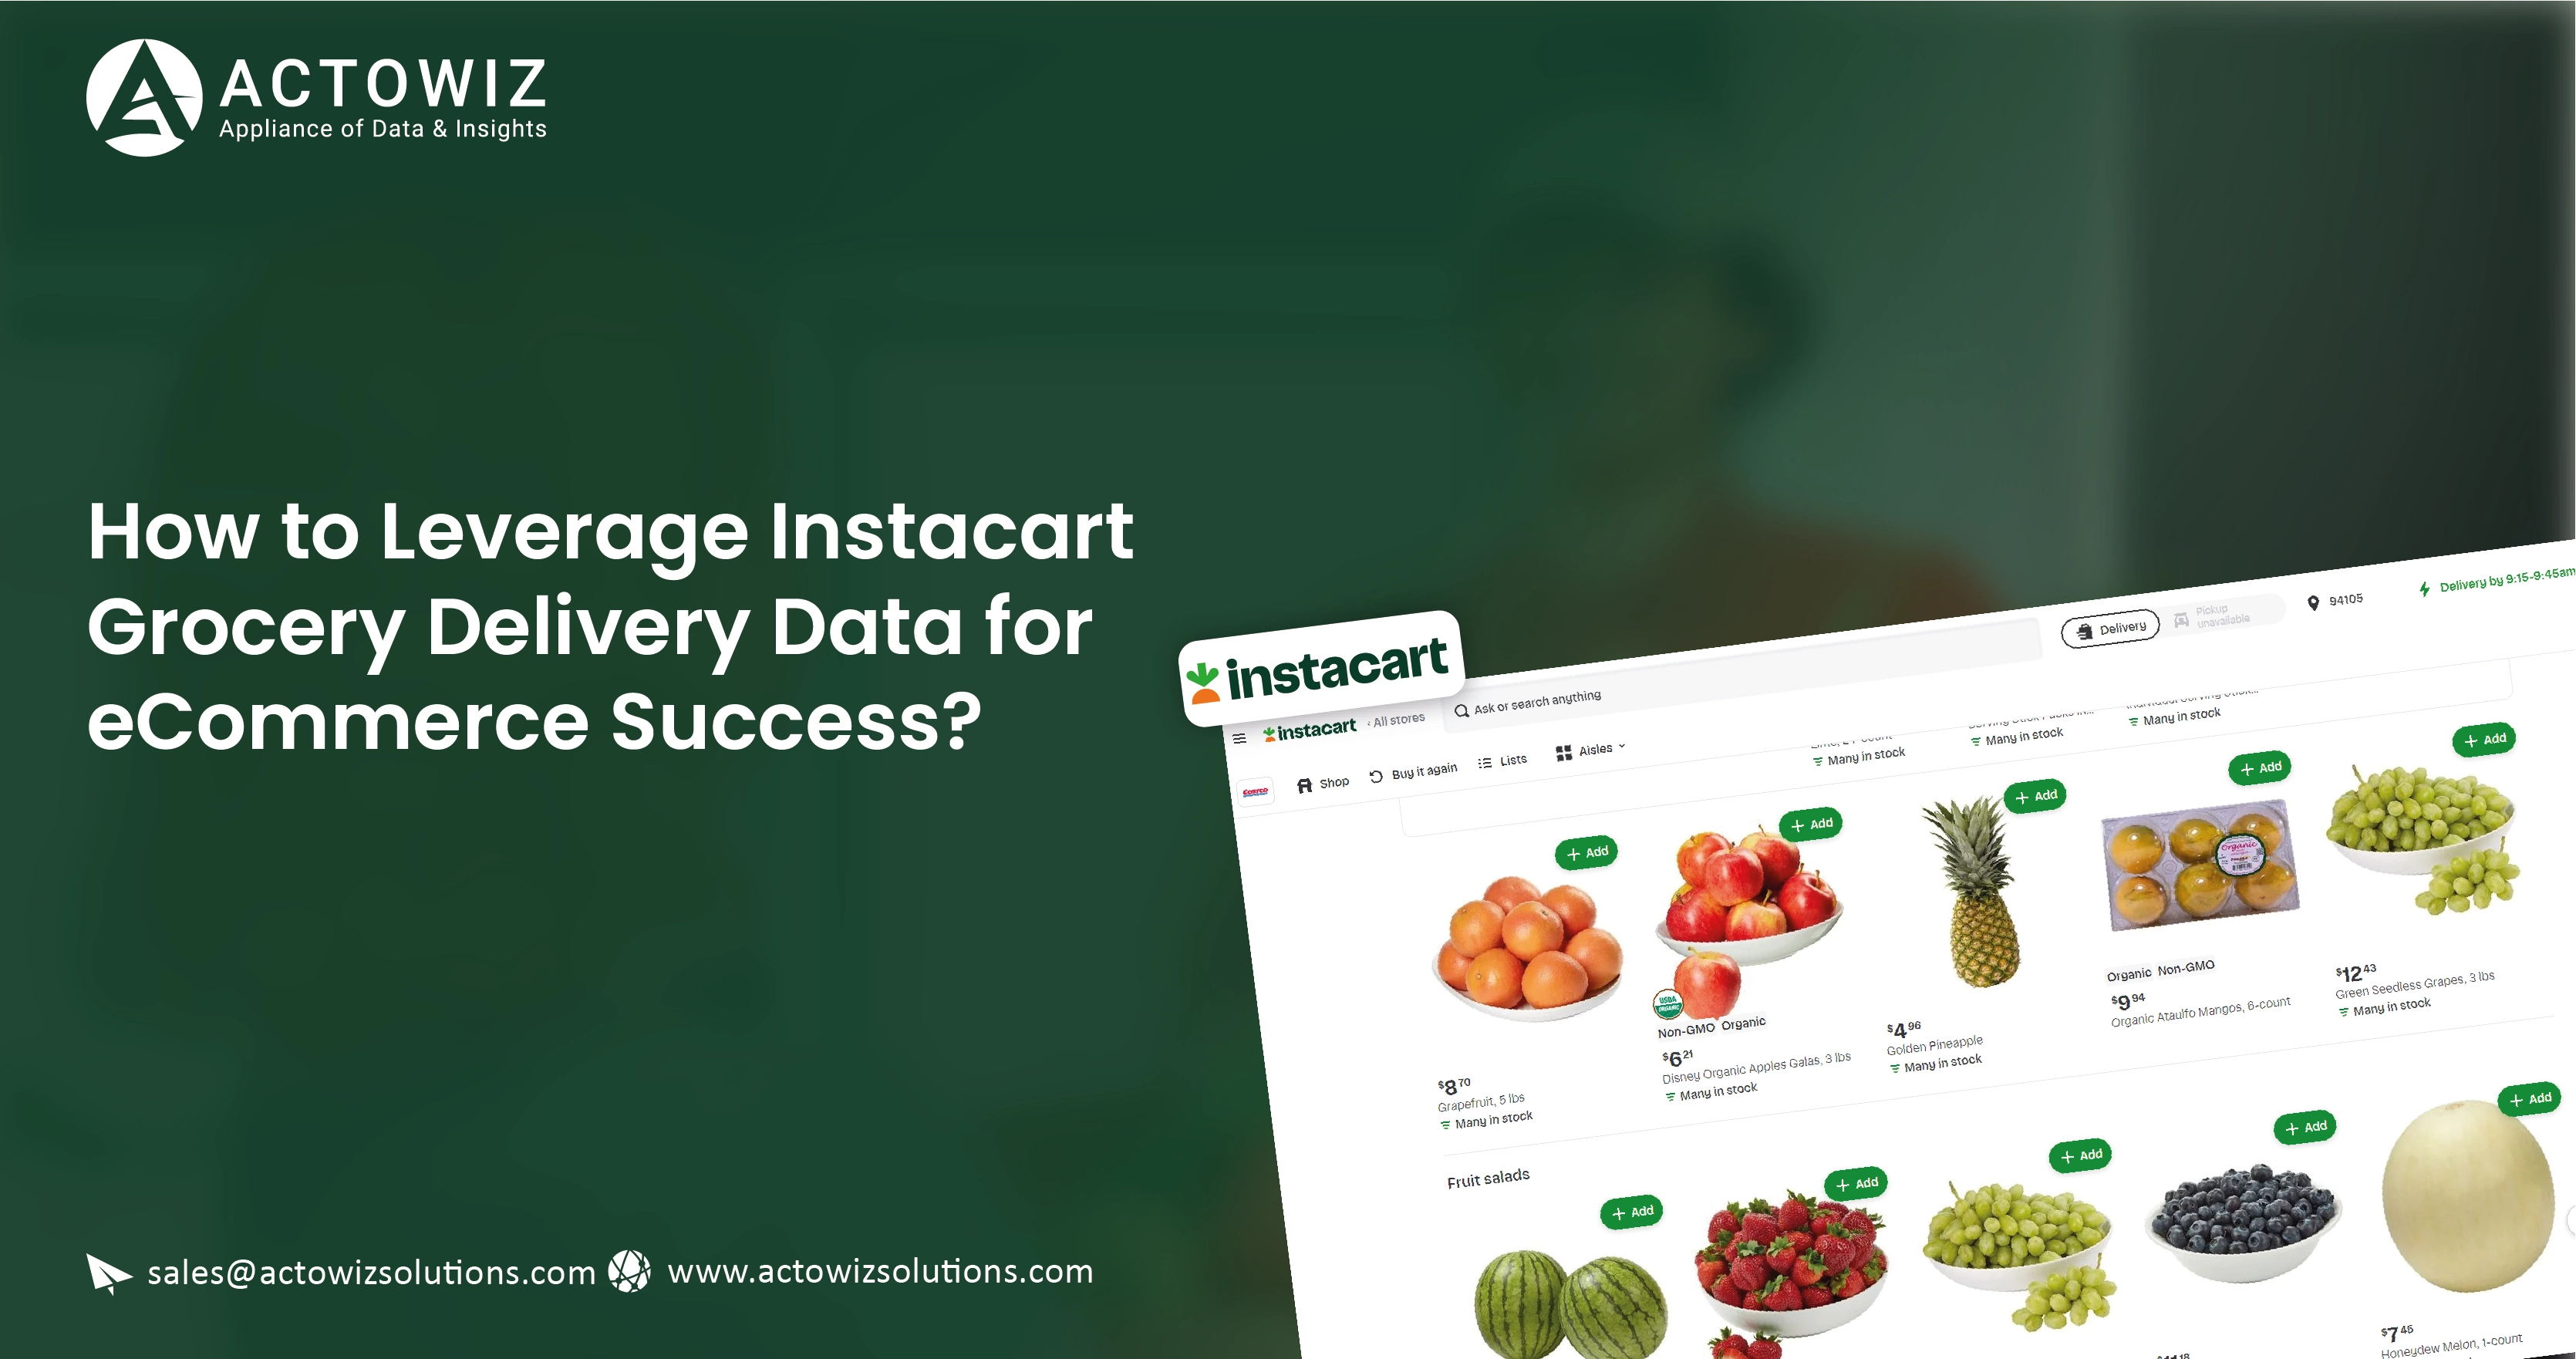 How-to-Leverage-Instacart-Grocery-Delivery-Data-for-eCommerce-Success-01